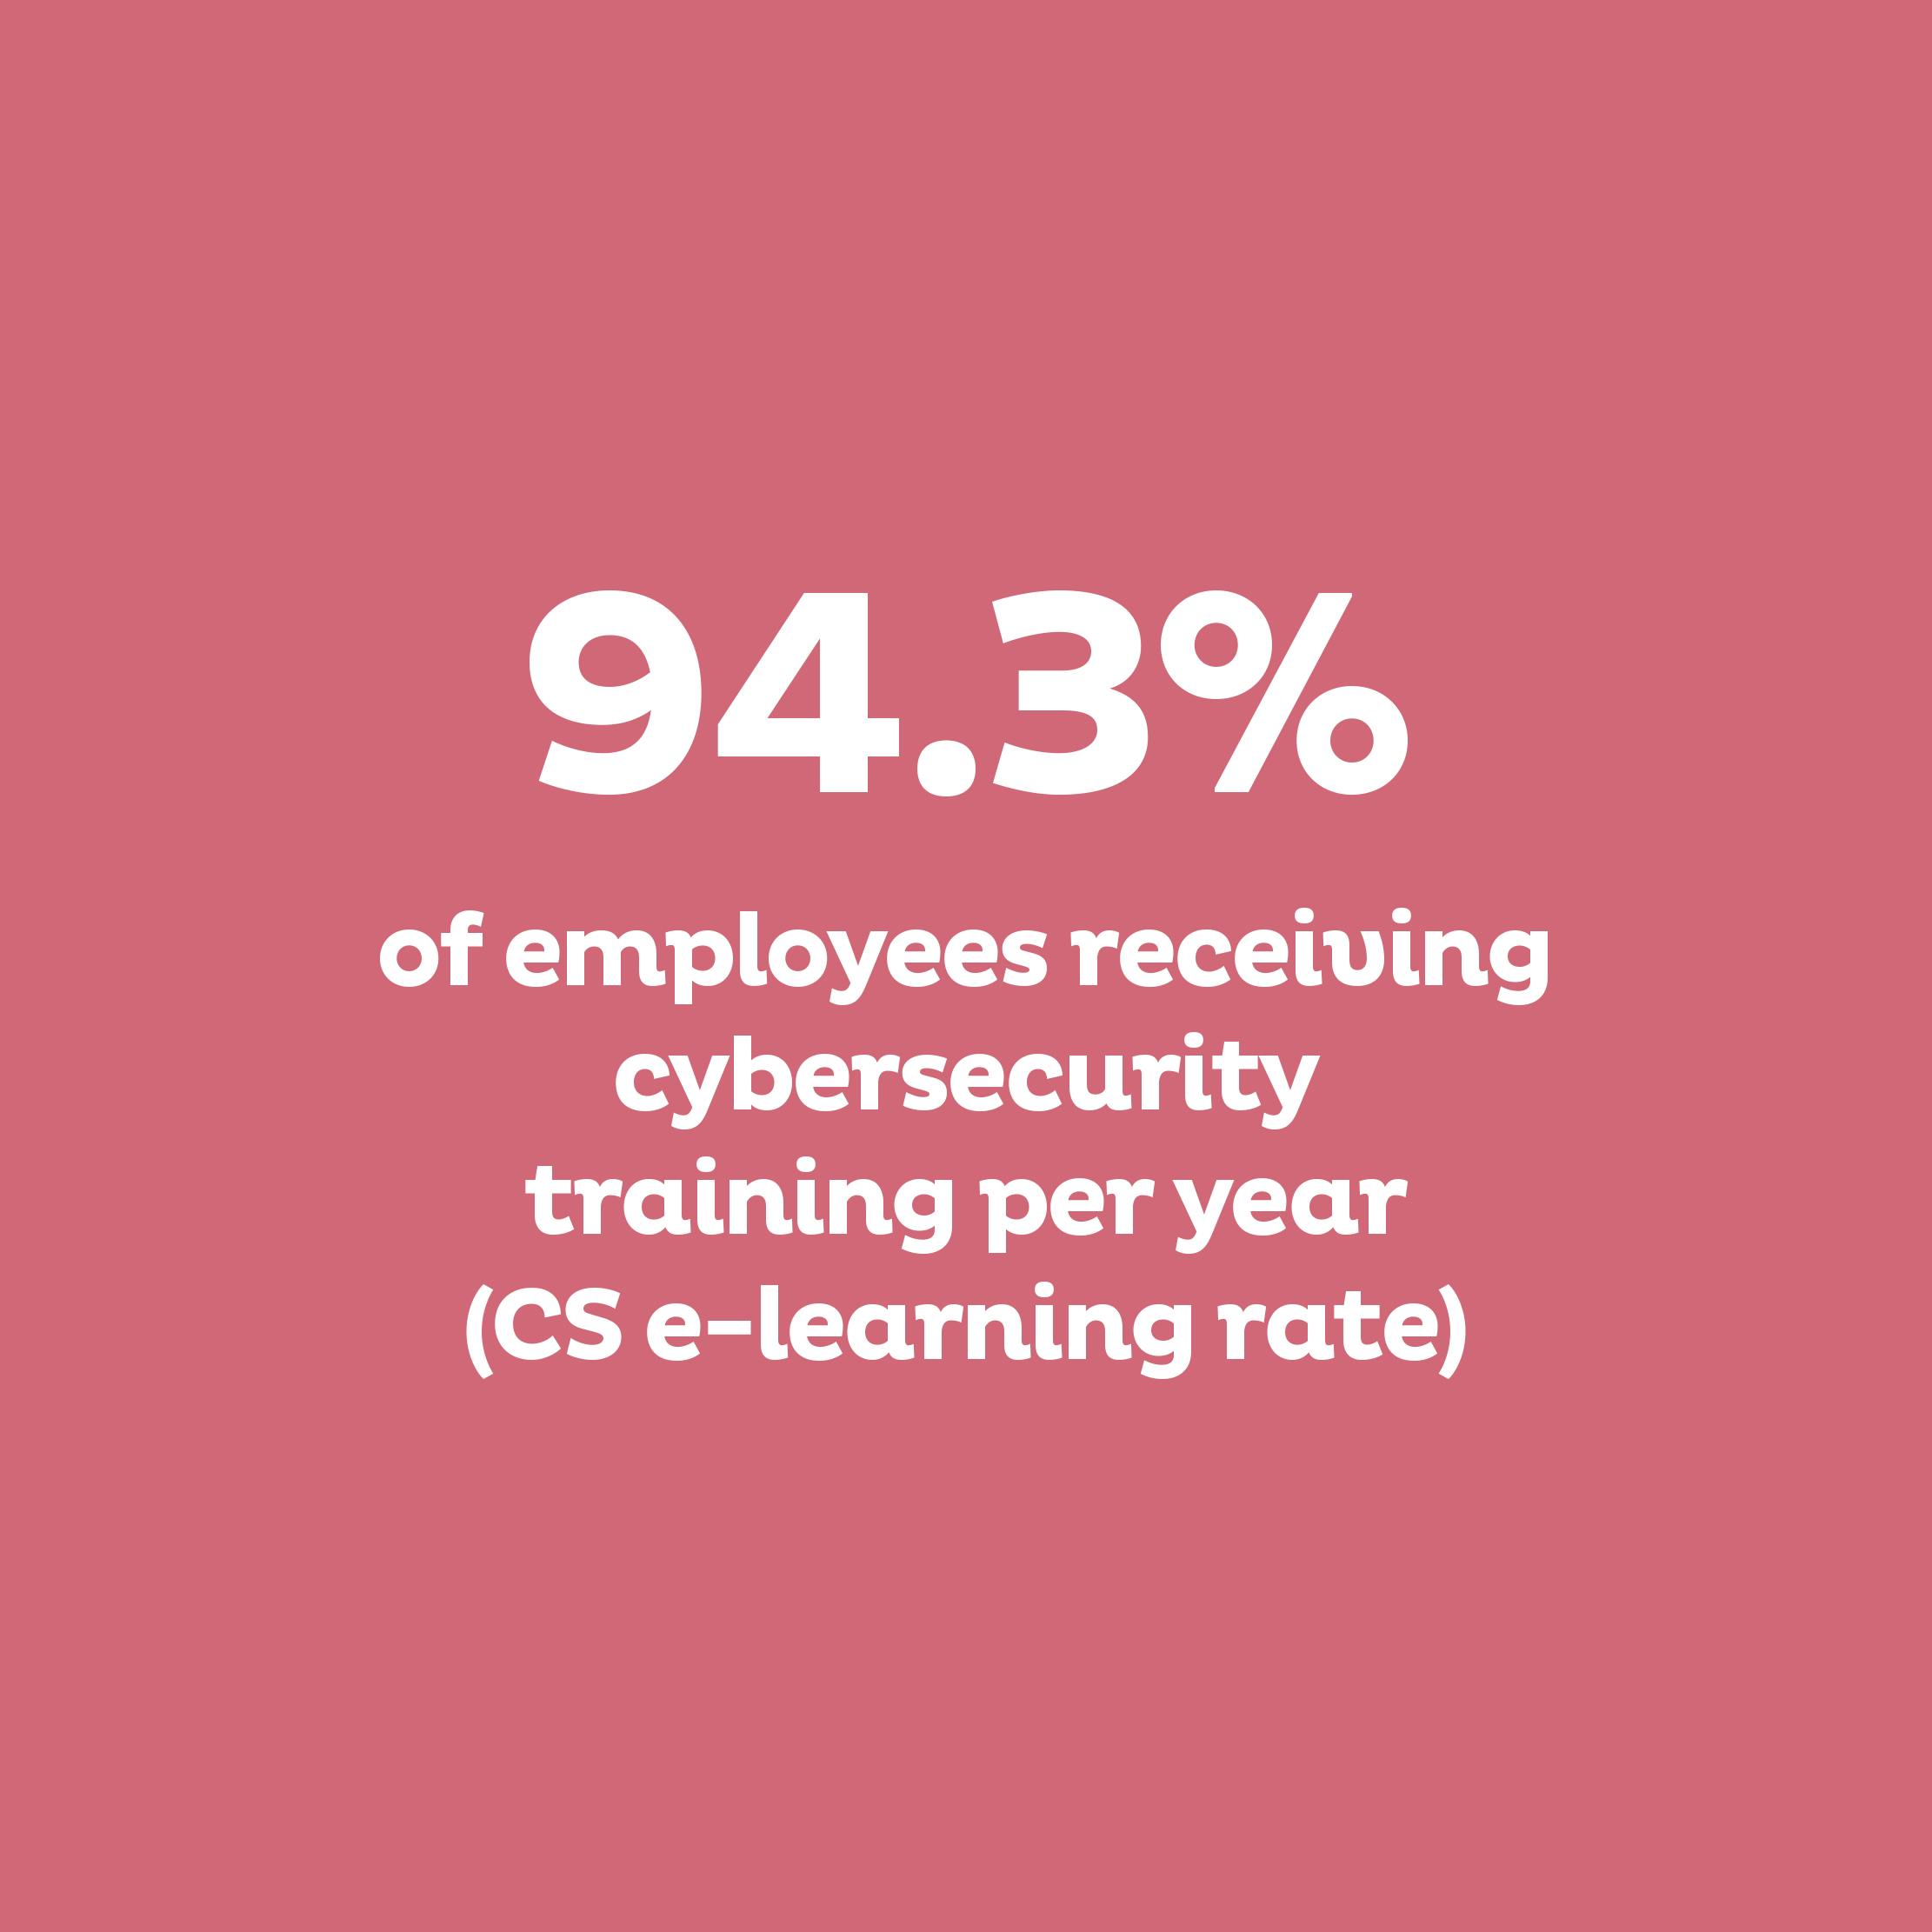 94.3% of employees receiving cybersecurity training per year (CS e-learning rate) 